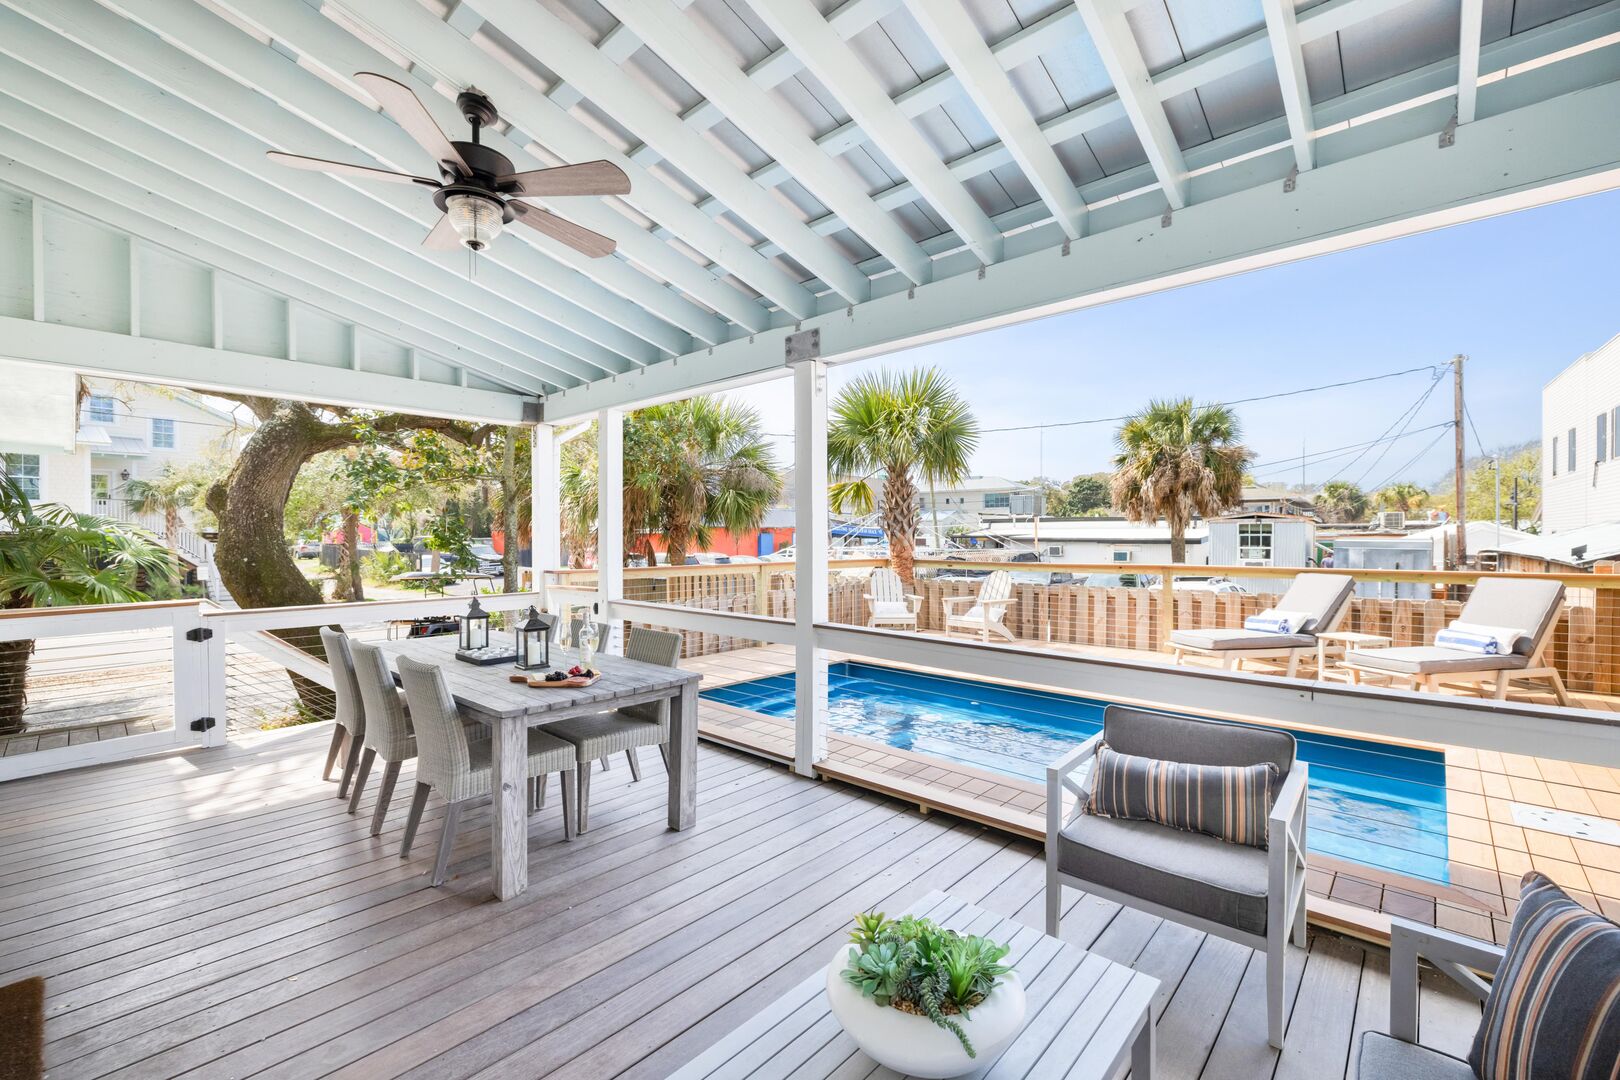 Two seperate porches and pool deck for your outdoor entertaining!